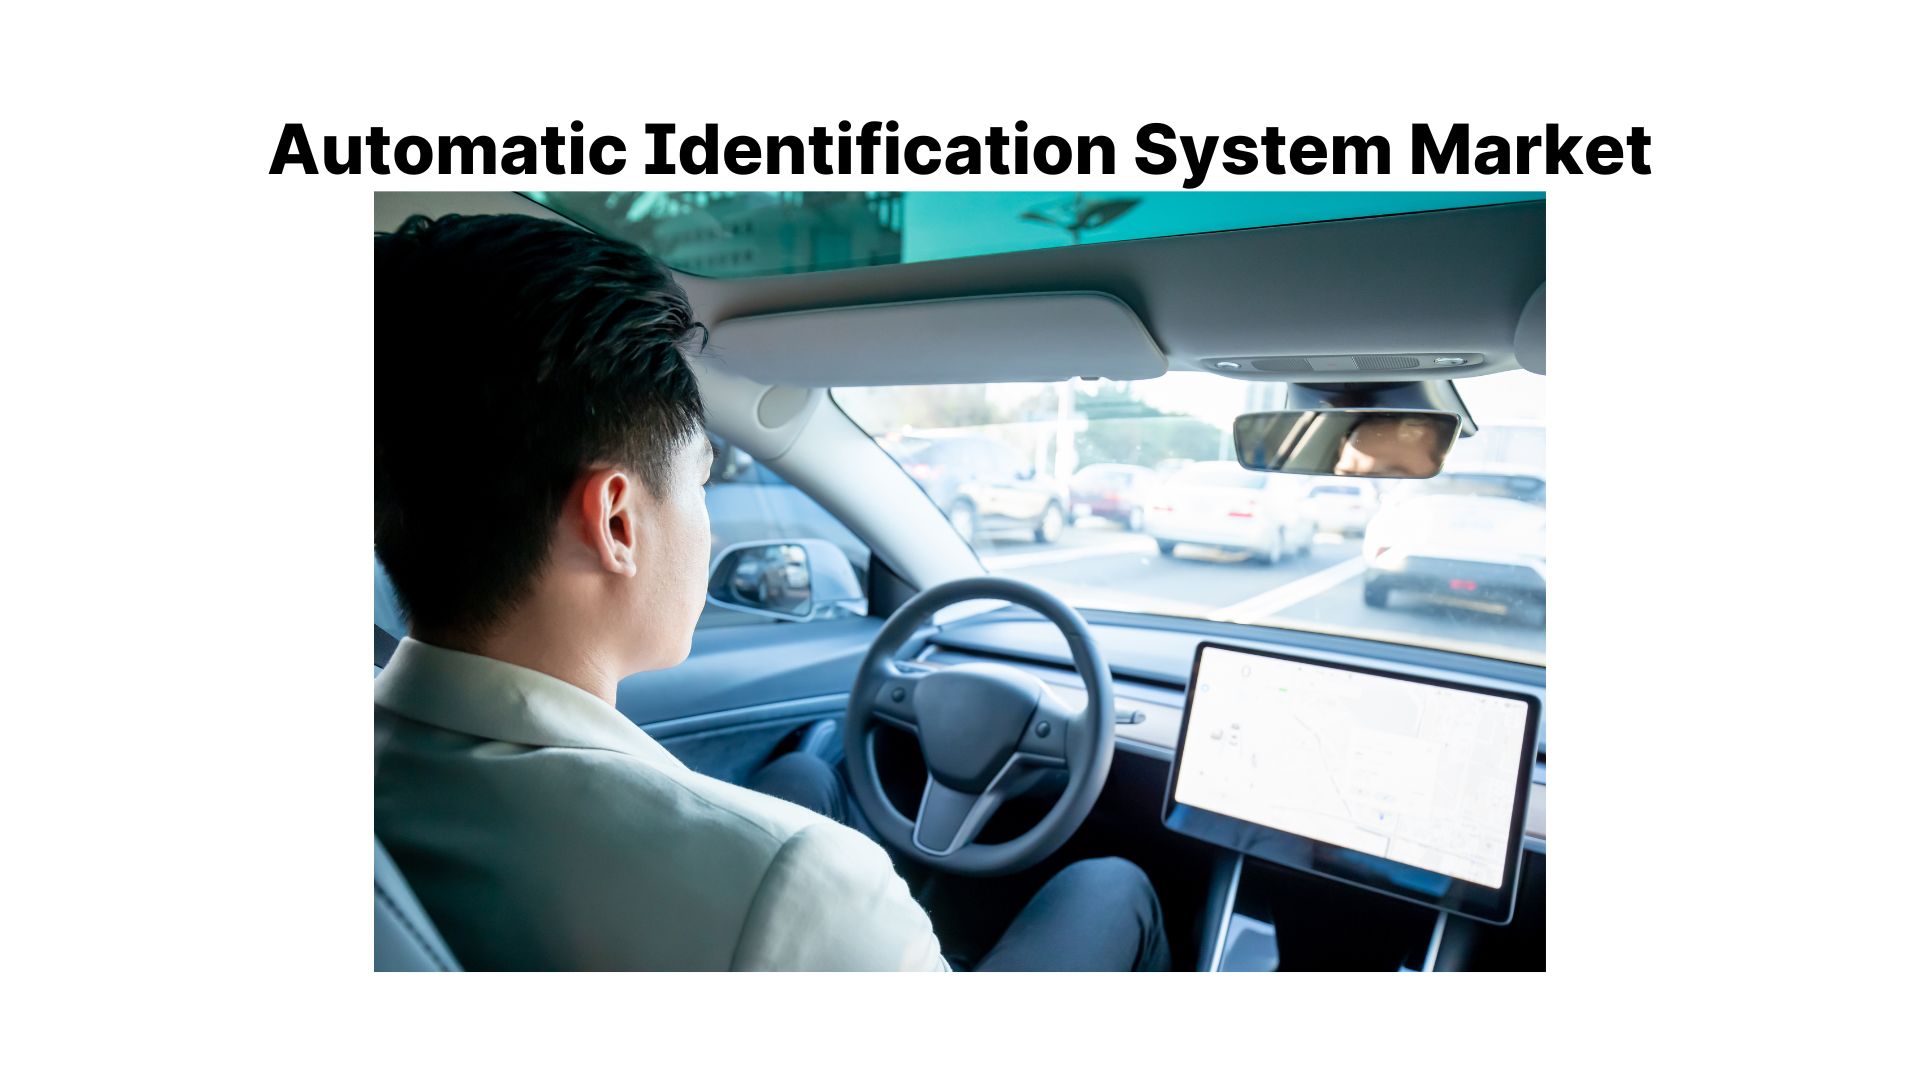 Automatic Identification System Market To Offer Numerous Opportunities At A CAGR Of 6.0% through 2033